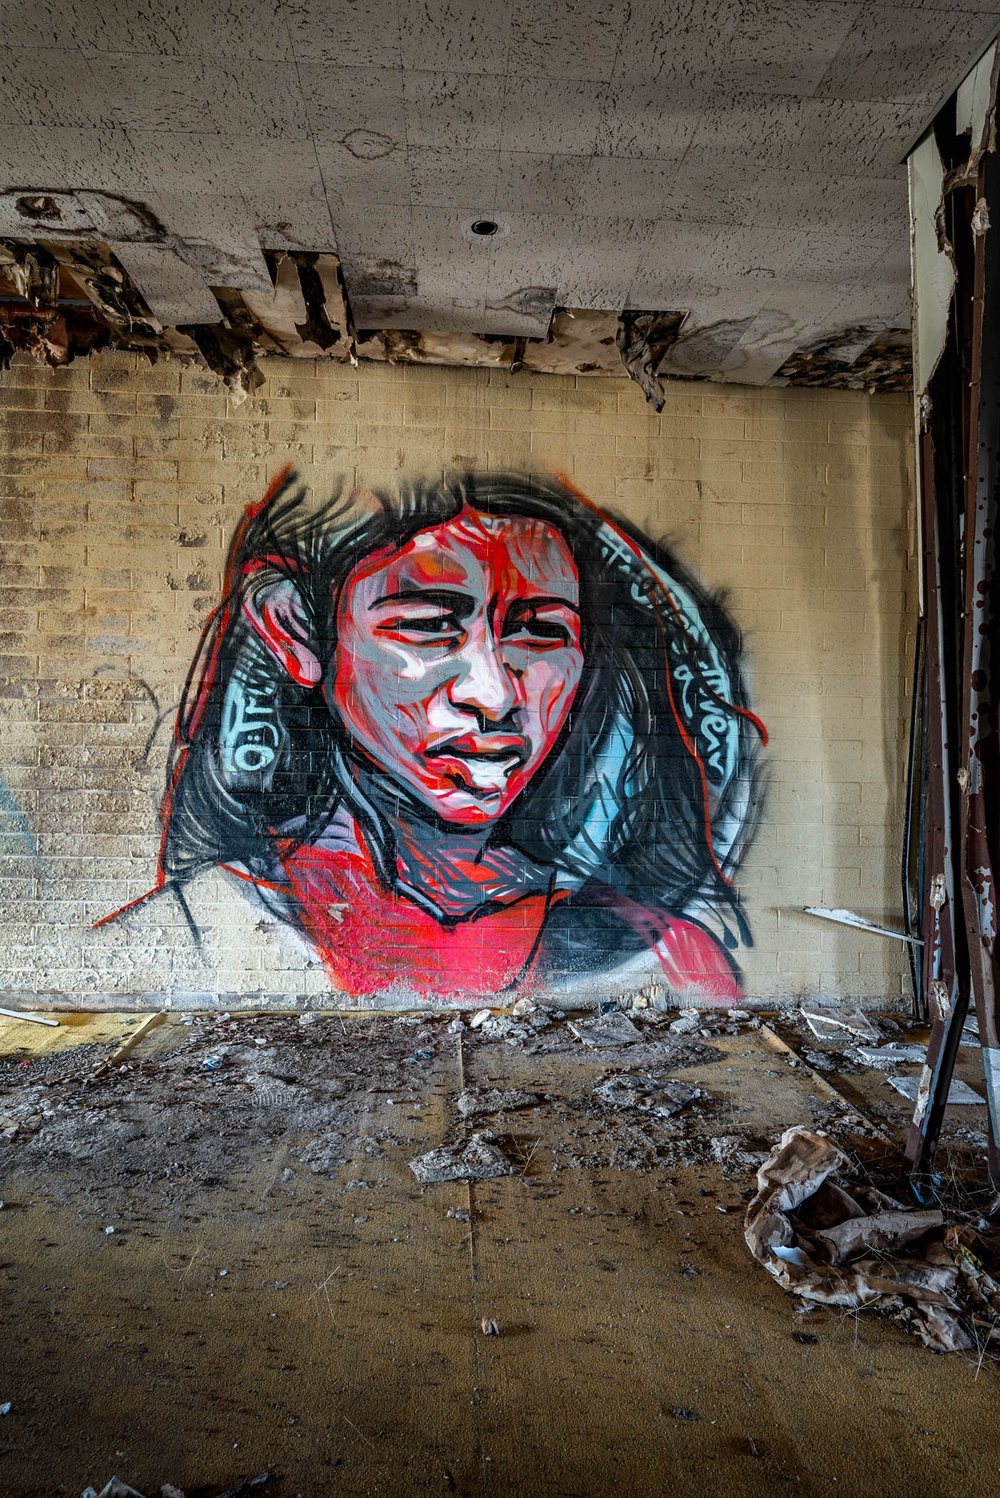 Murals in an abandoned Native American Boarding School. Aside from basic color and contrast adjustments, no changes were made to the original image.